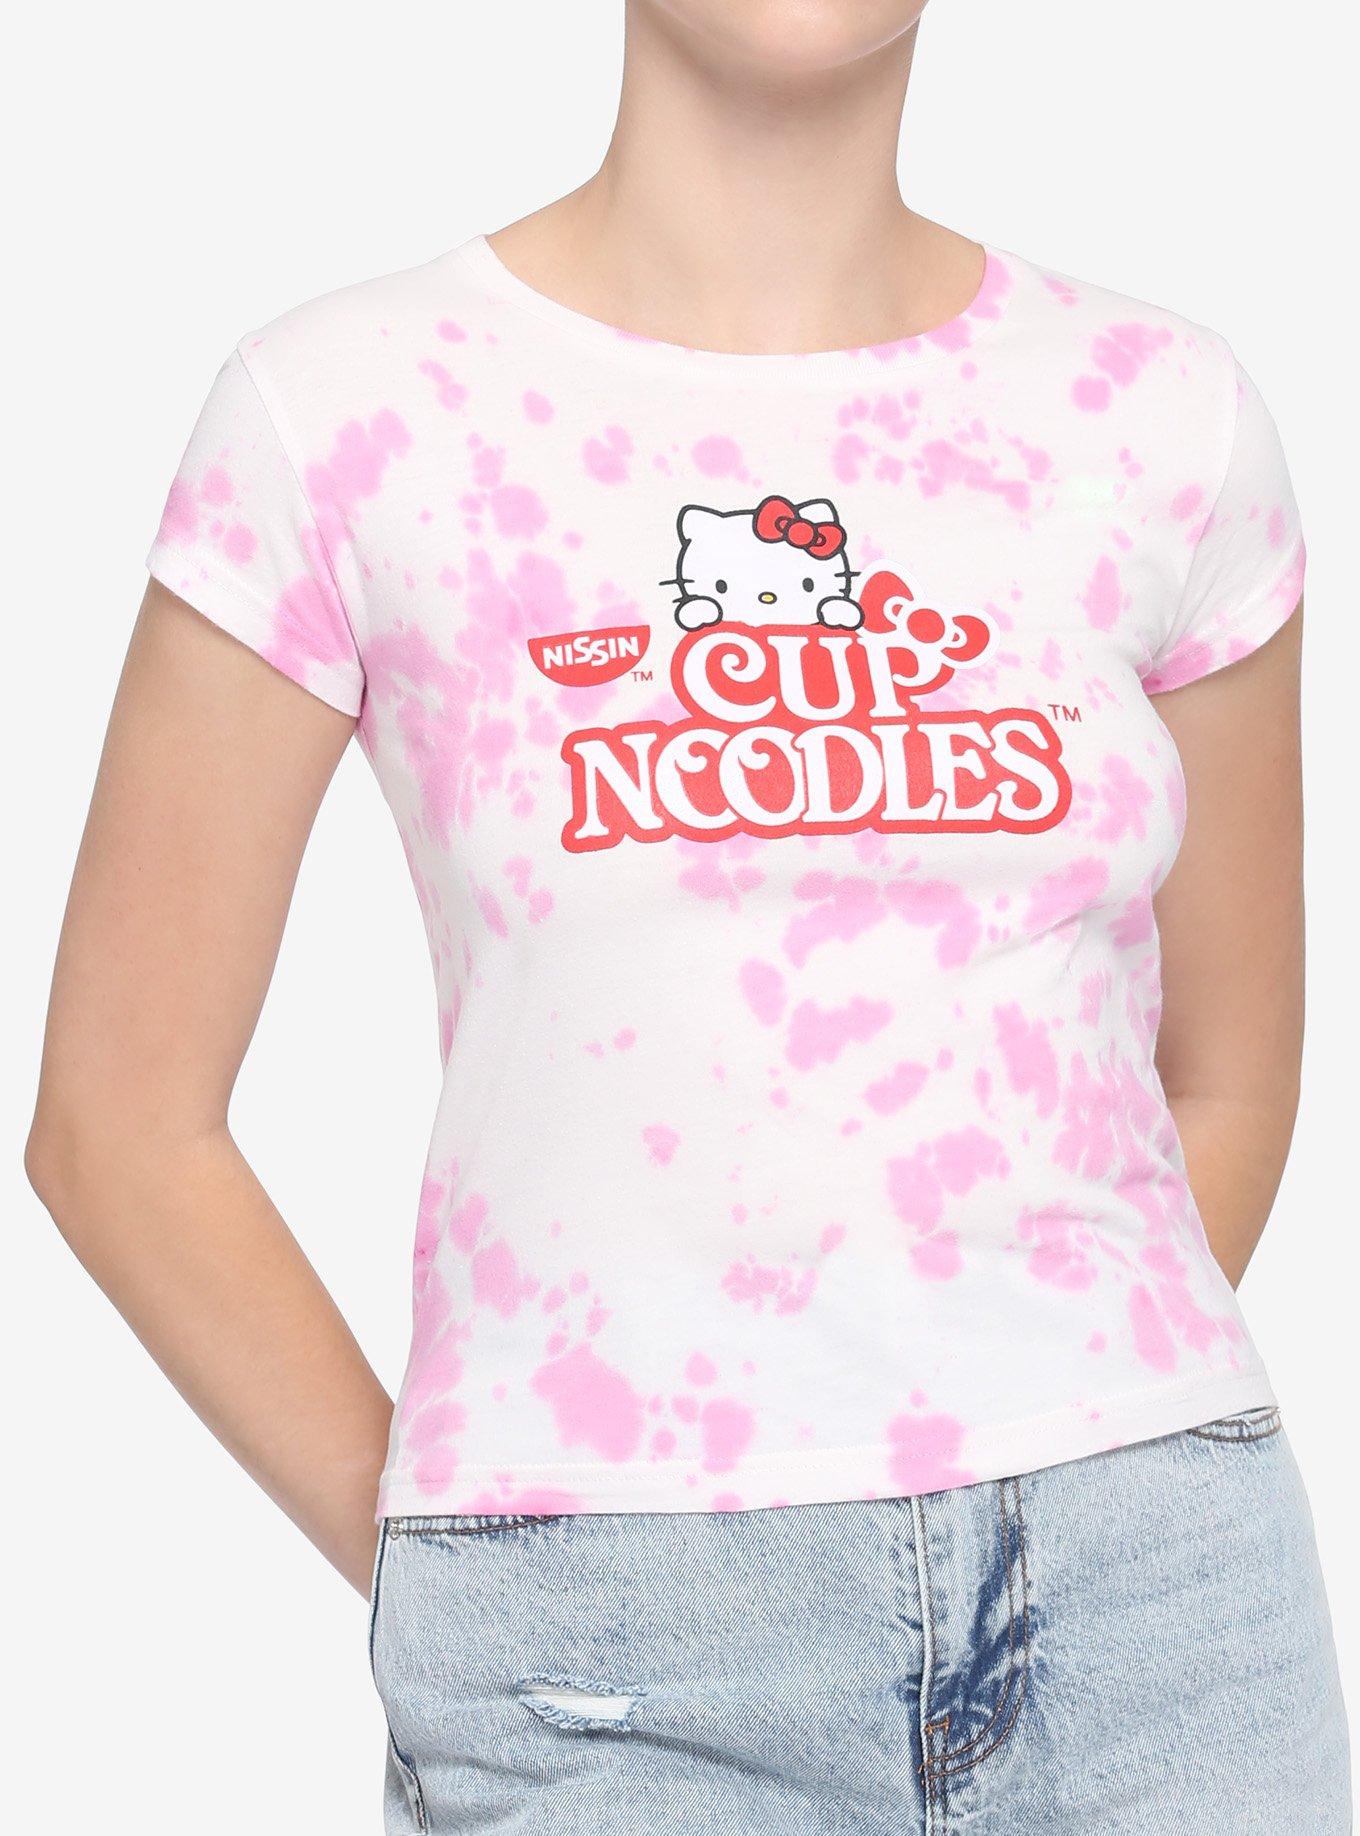 Nissin Cup Noodles X Hello Kitty Logo Tie-Dye Girls Baby T-Shirt, MULTI, hi-res